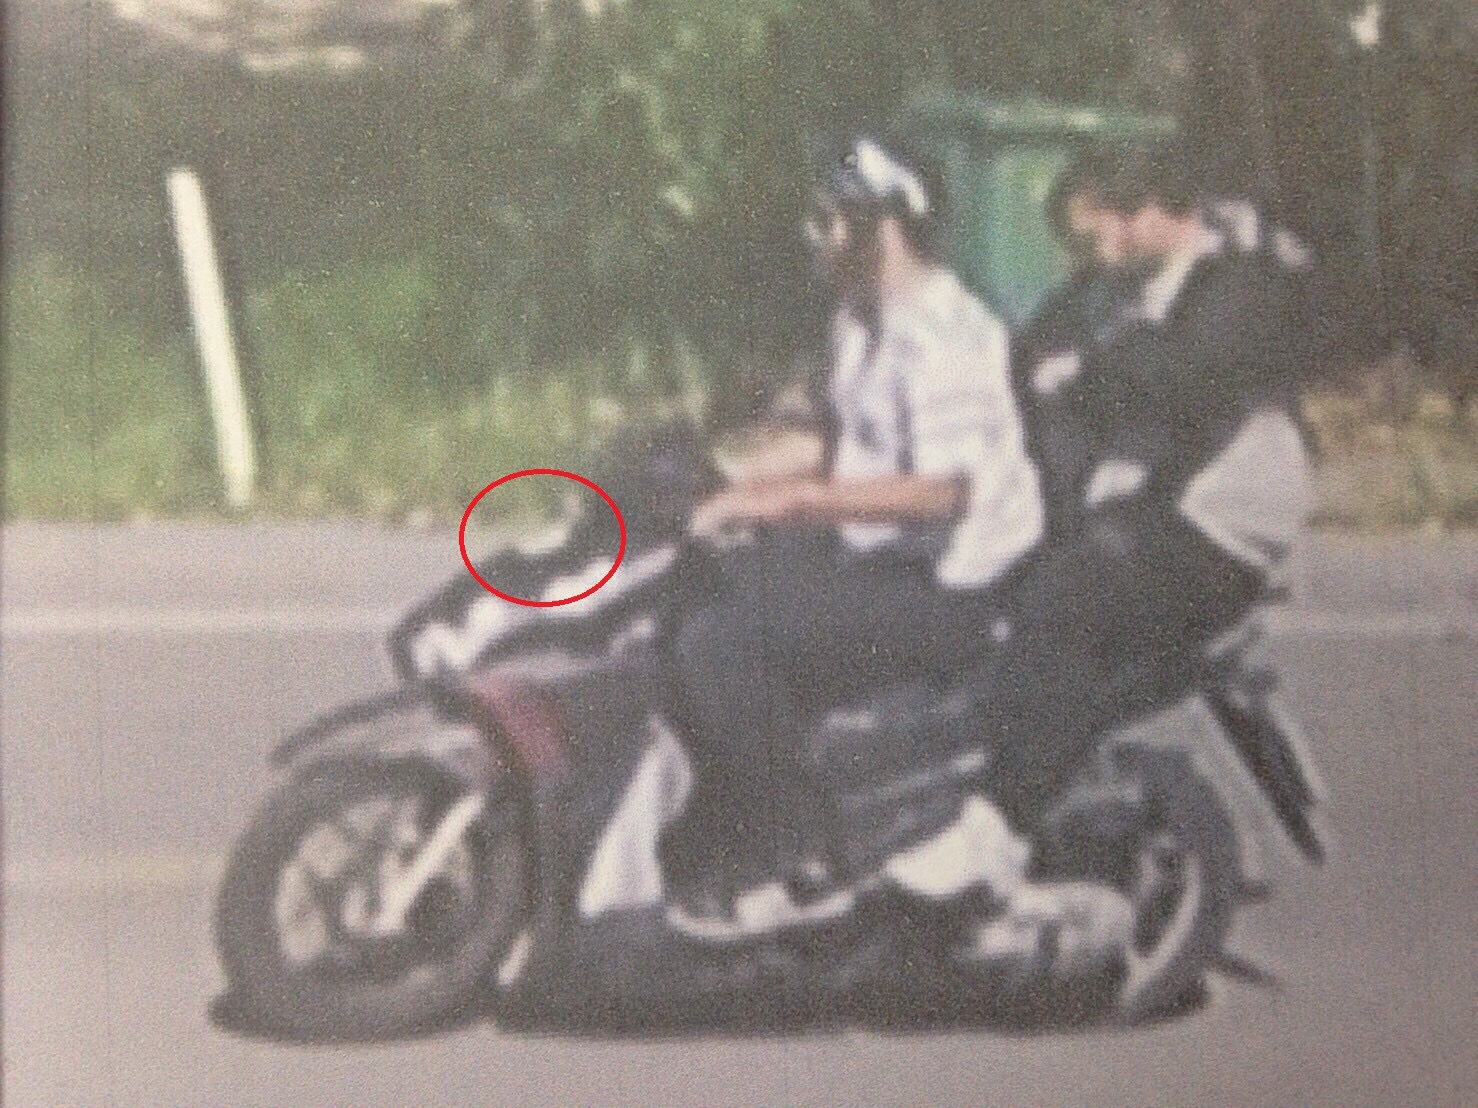 Thai police quickly identified the suspects by tracing the motorbike they rented using their original passports.